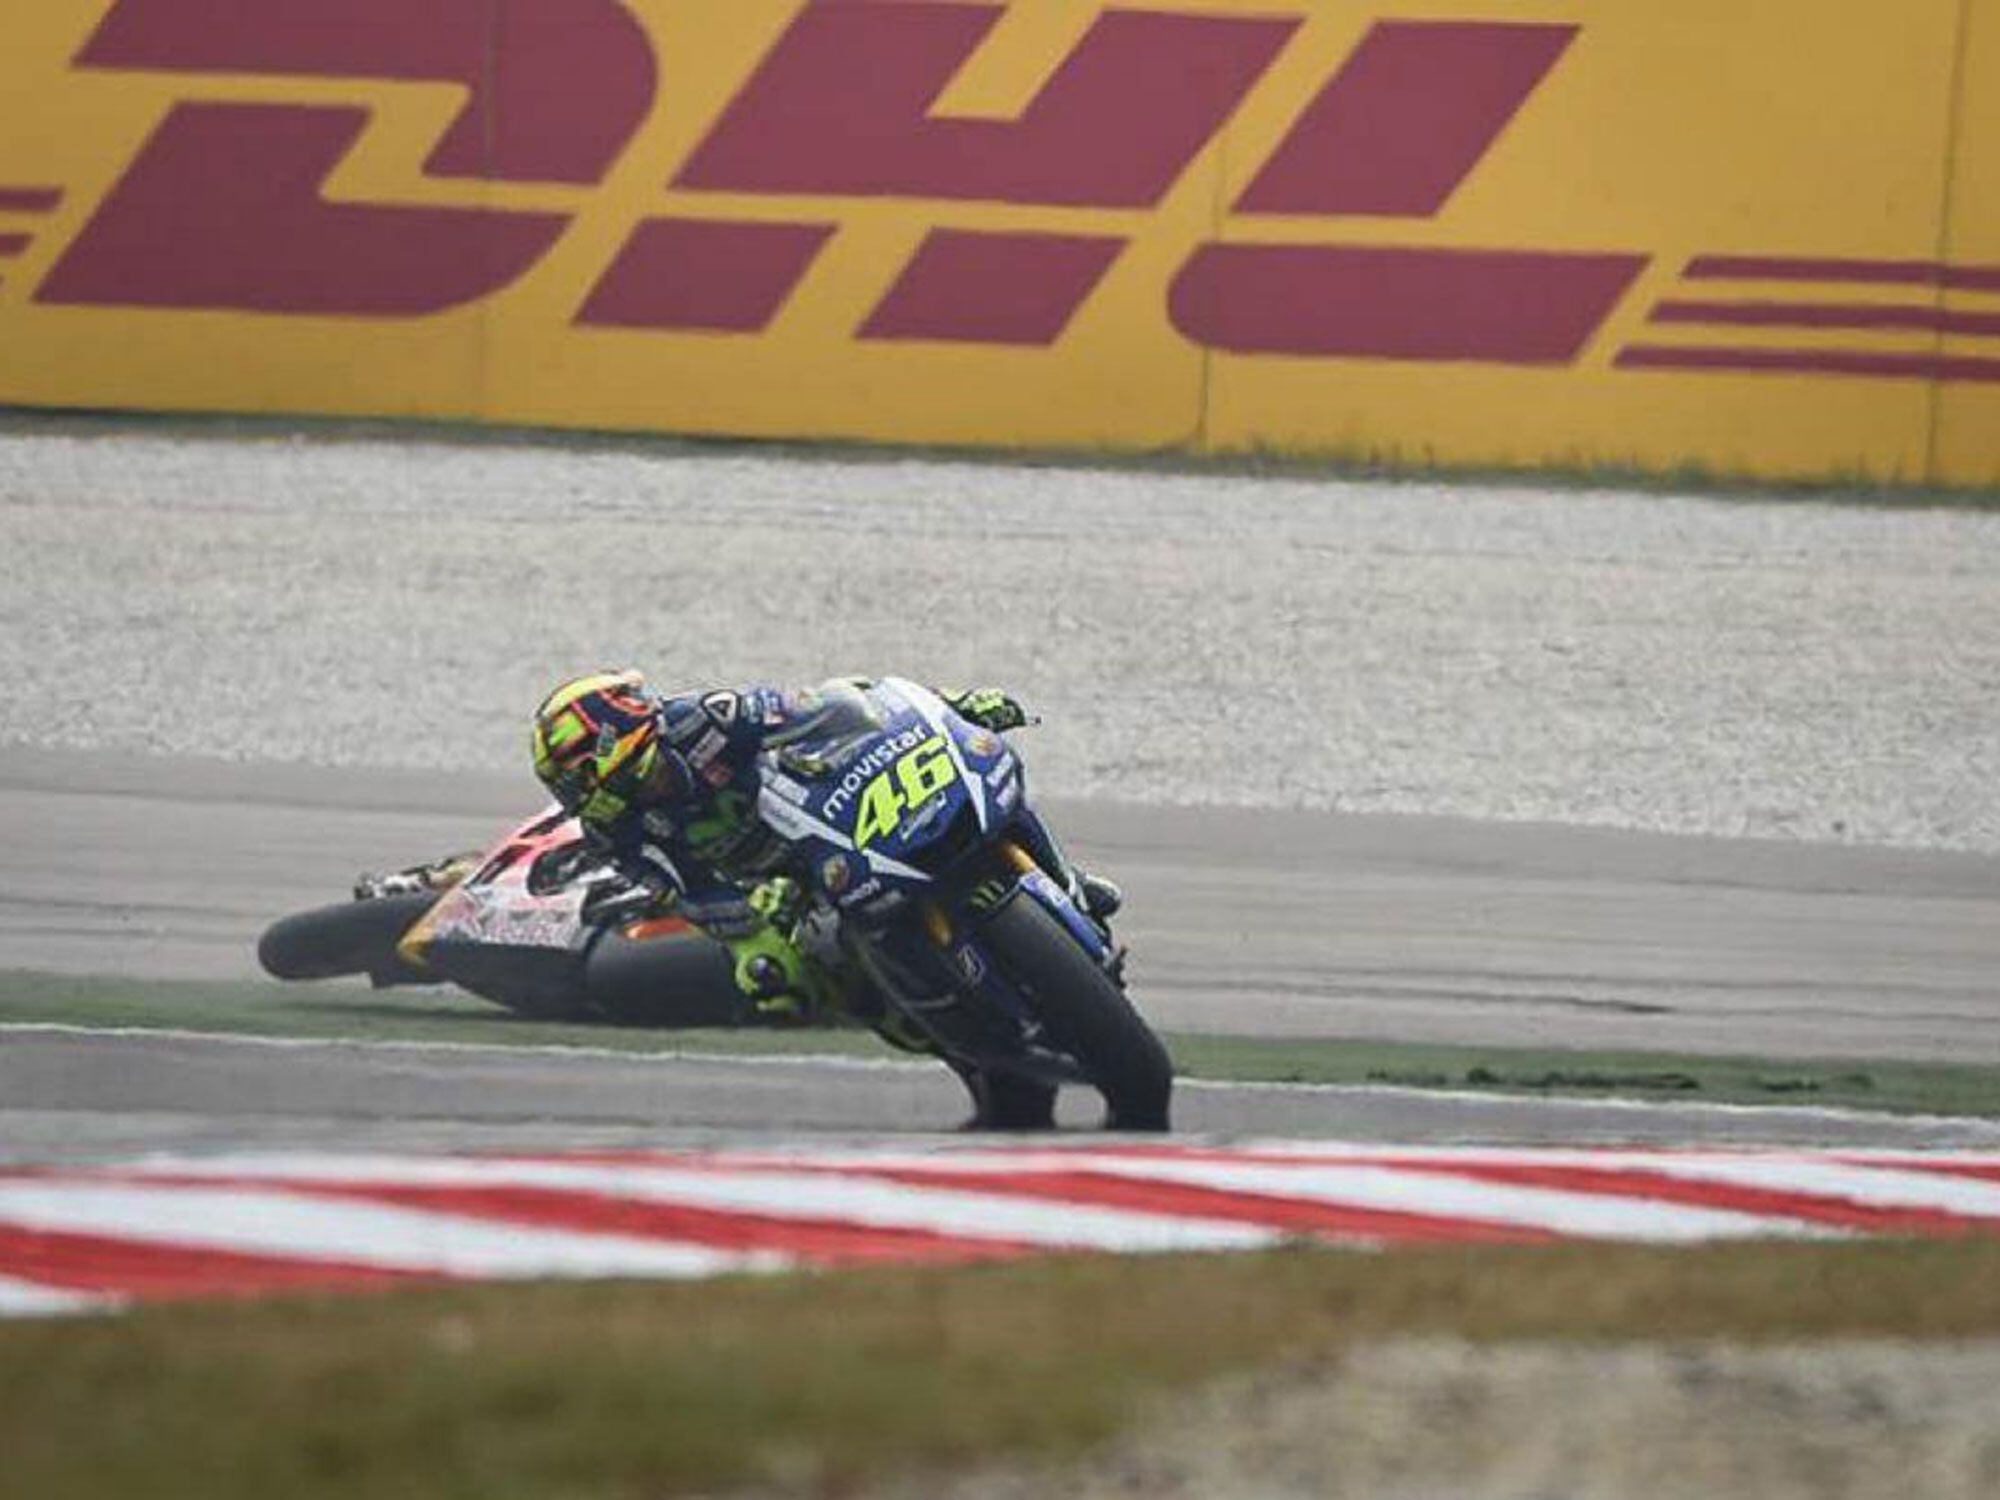 Did Valentino Rossi learn how to knock Marc Márquez down from Fast Freddie Spencer? Nick likes to think so.